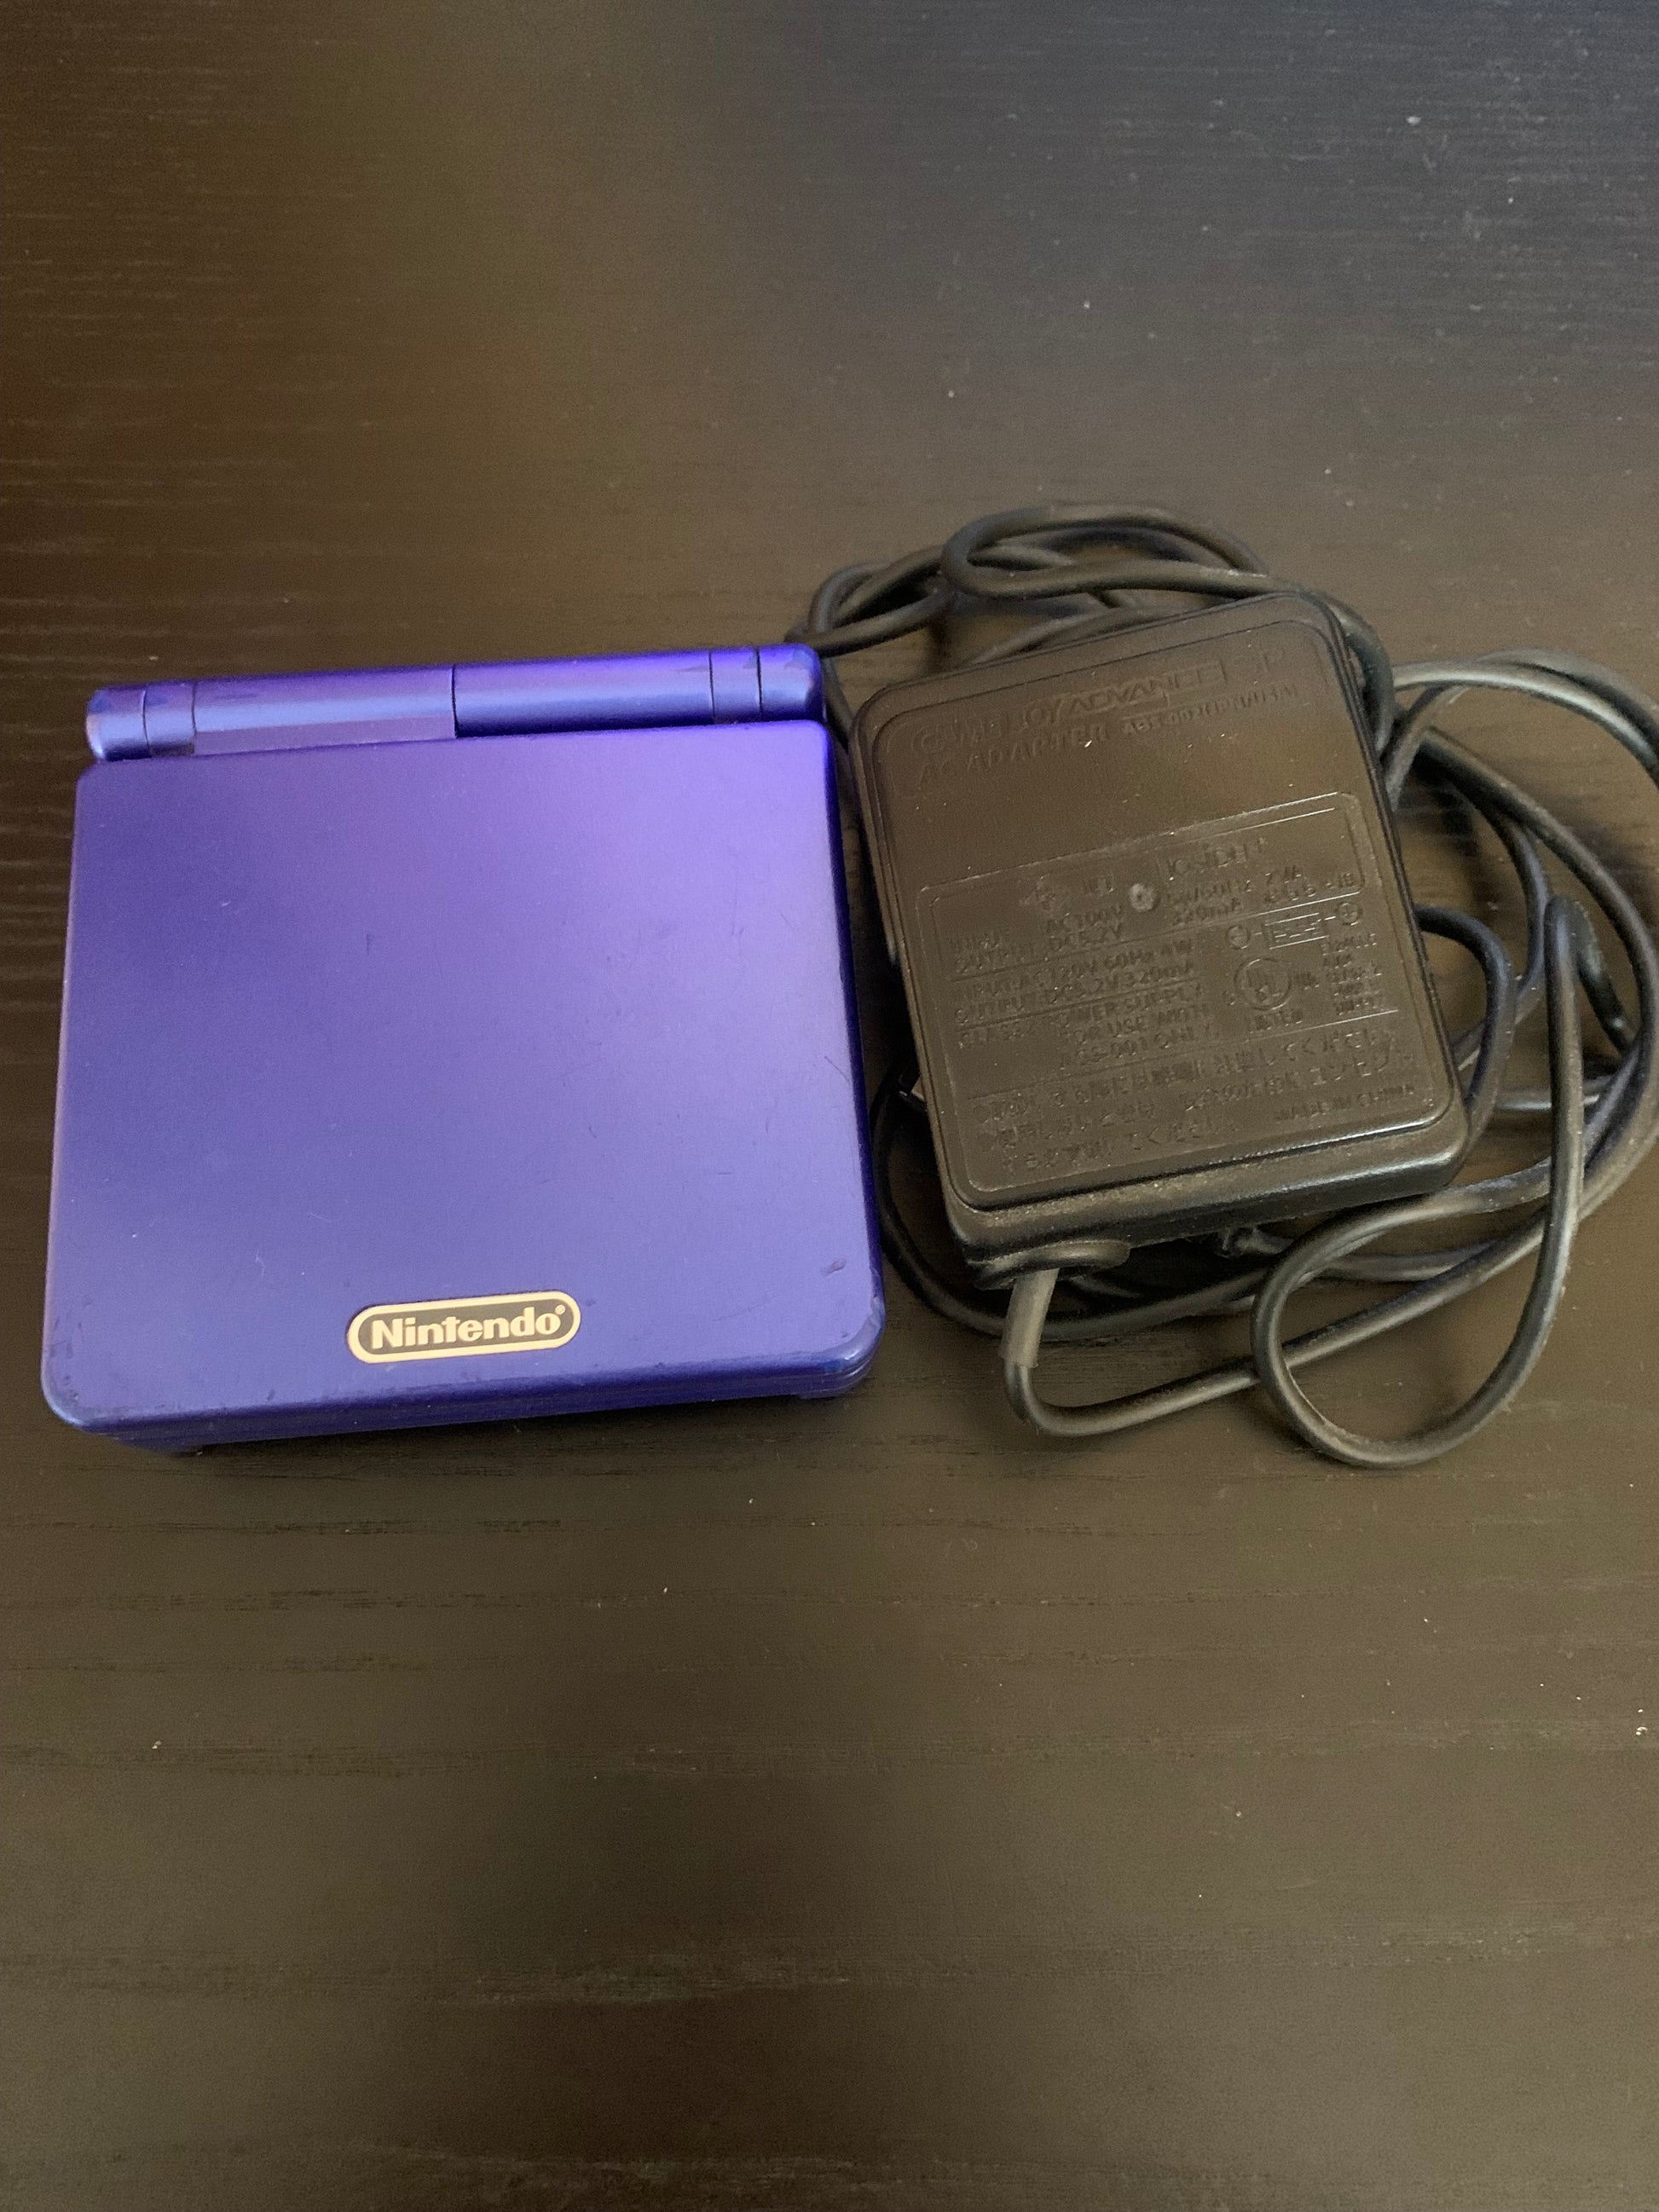 GameBoy Advance SP System Cobalt Blue w/Charger - AGS 001 - Premier Trading Cards